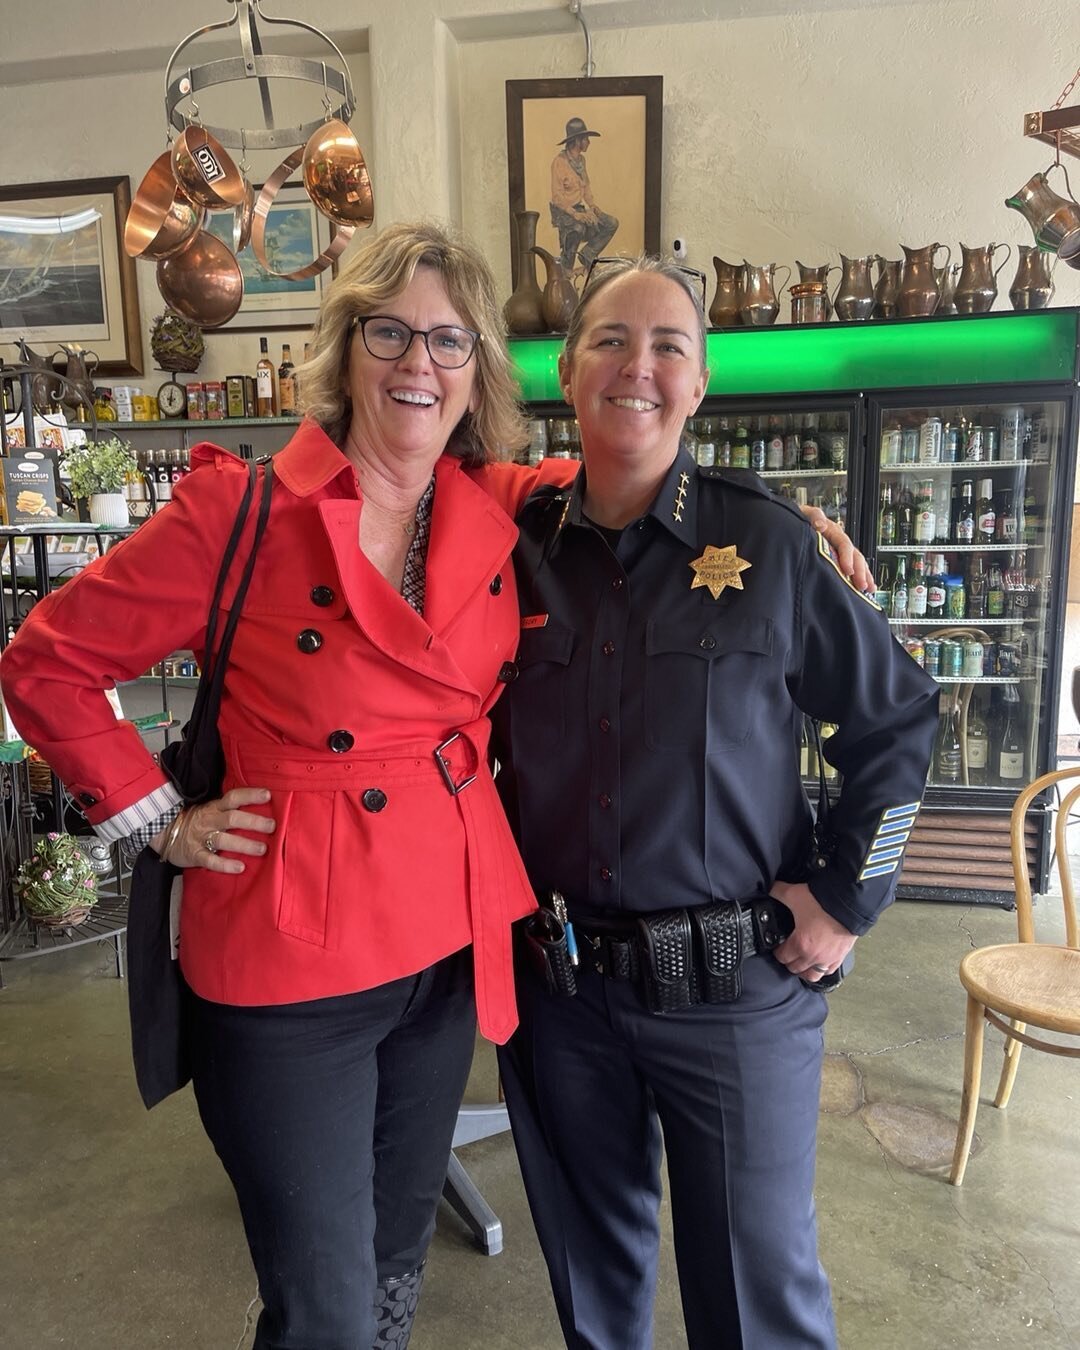 Steven and I enjoyed meeting our new Chief of the Sausalito Police Department this week. Thank you Stacie Gregory for such an inspiring presentation, and for introducing us to your team! #sausalito #sausalitopolicedepartment #Sausalitopolice #womenin